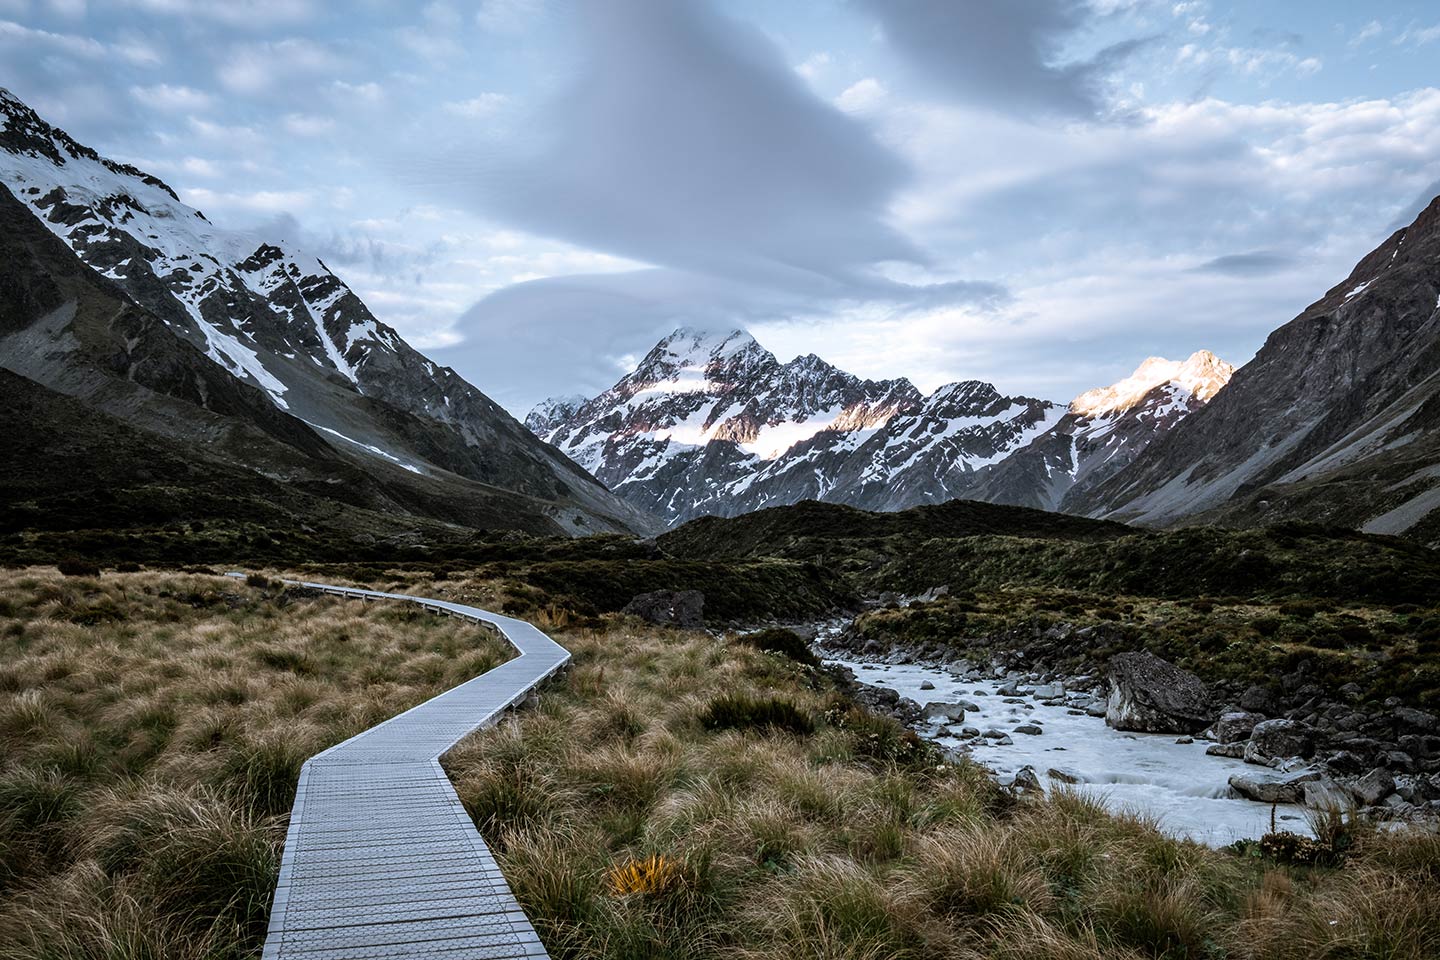 A wooden path leads towards Aoraki/Mount Cook with moody clouds above. This image has been edited using the Sharp Desaturated Vibes preset which is included as part of the moody Lightroom presets package.